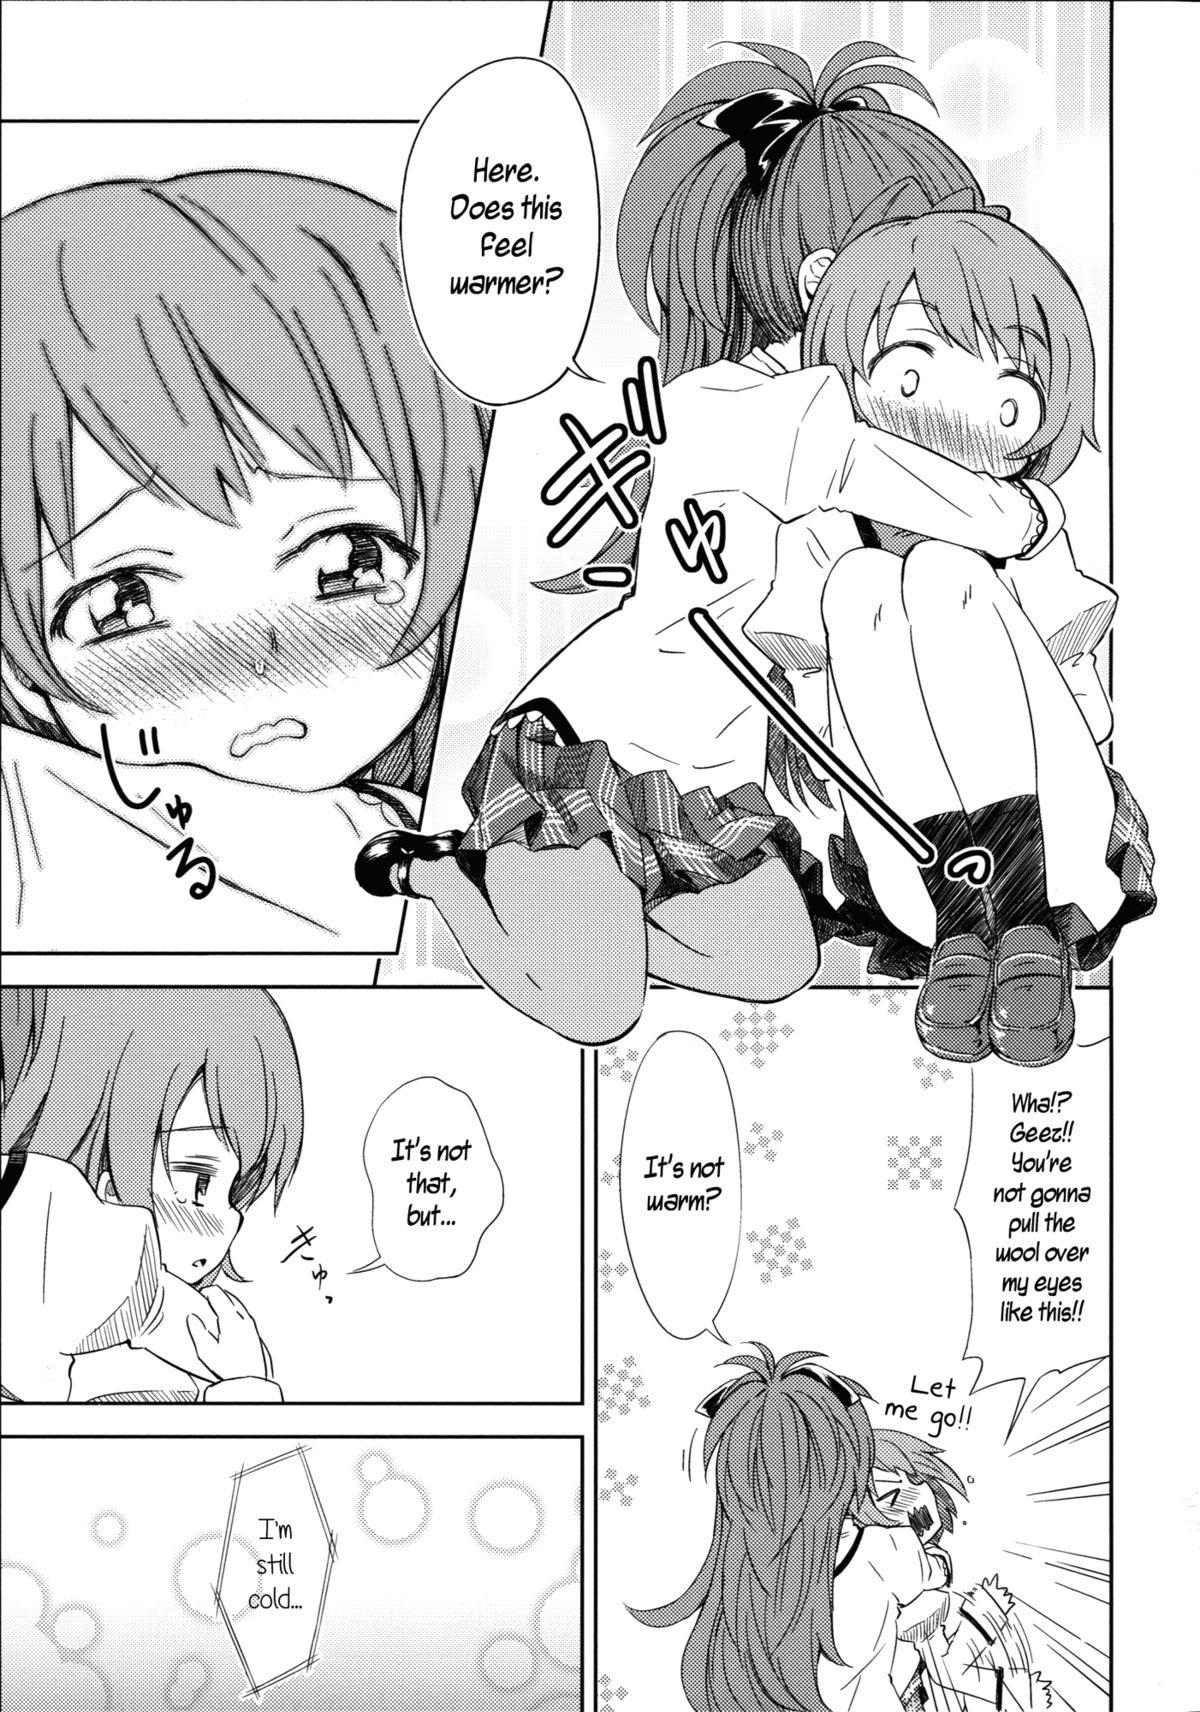 Reversecowgirl Lovely Girls' Lily Vol. 5 - Puella magi madoka magica Pov Blow Job - Page 11